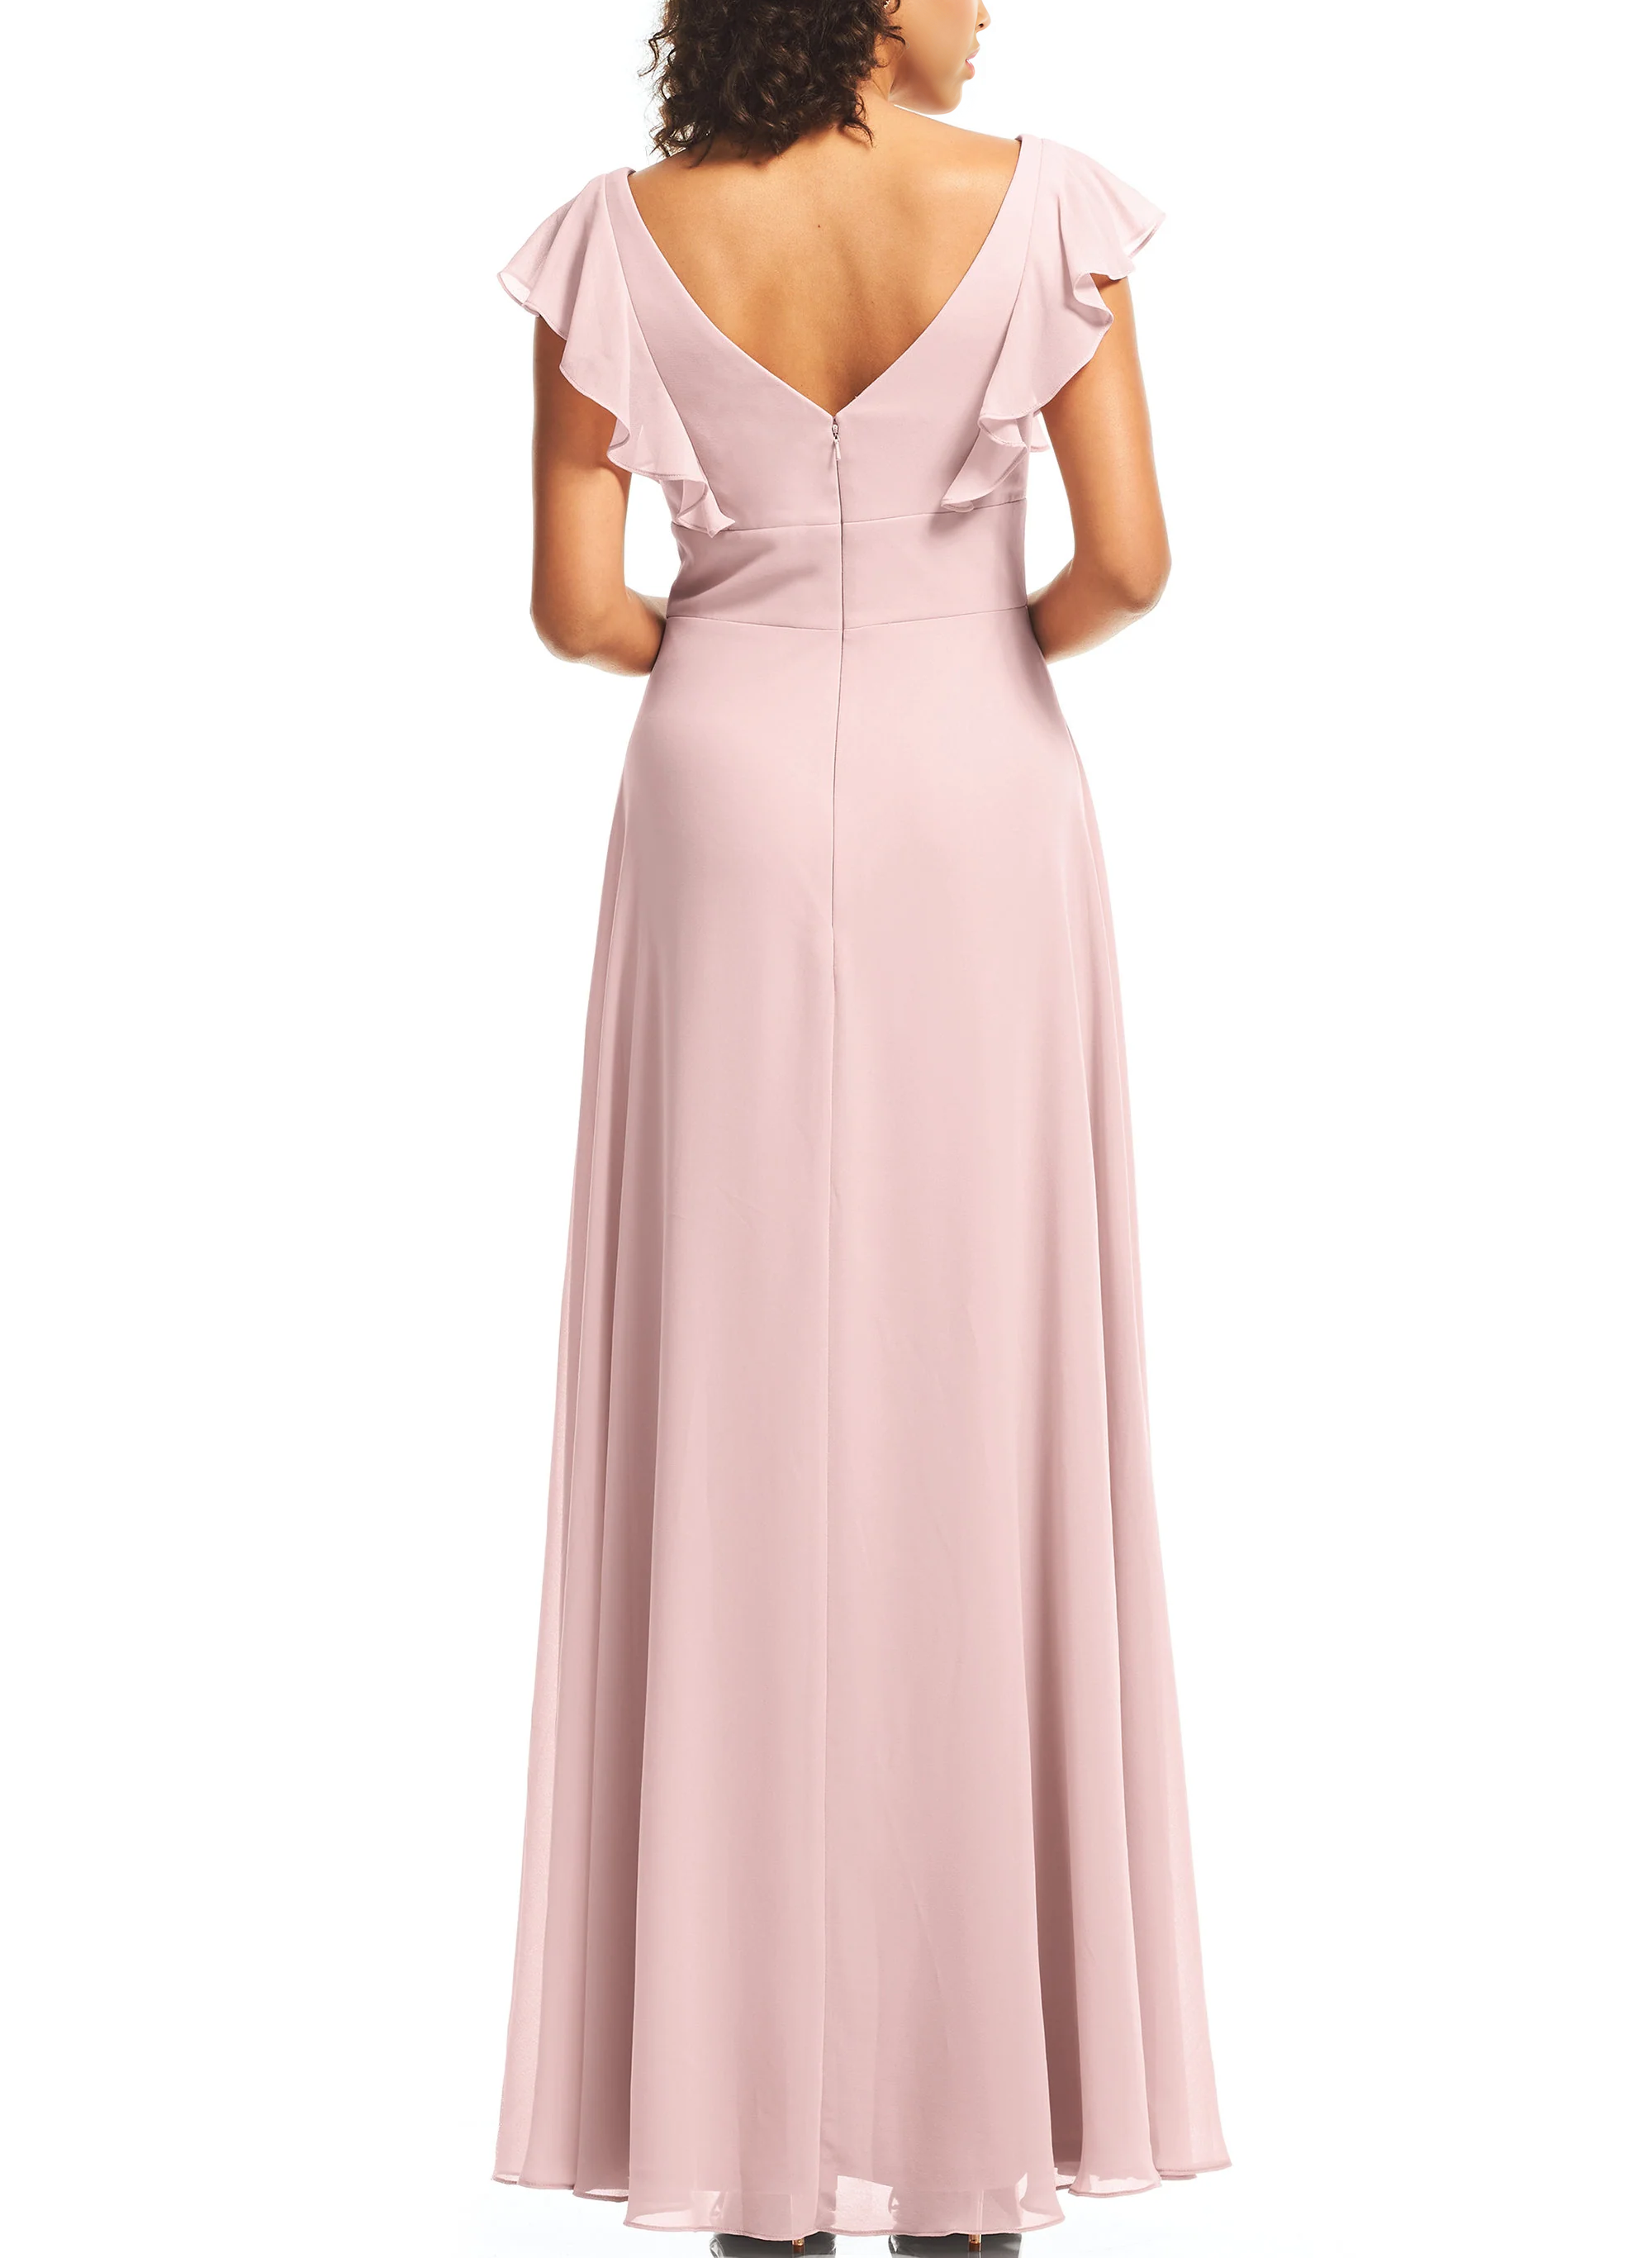 Blushing Pink A-Line Long Bridesmaid Dresses With Cascading Ruffles